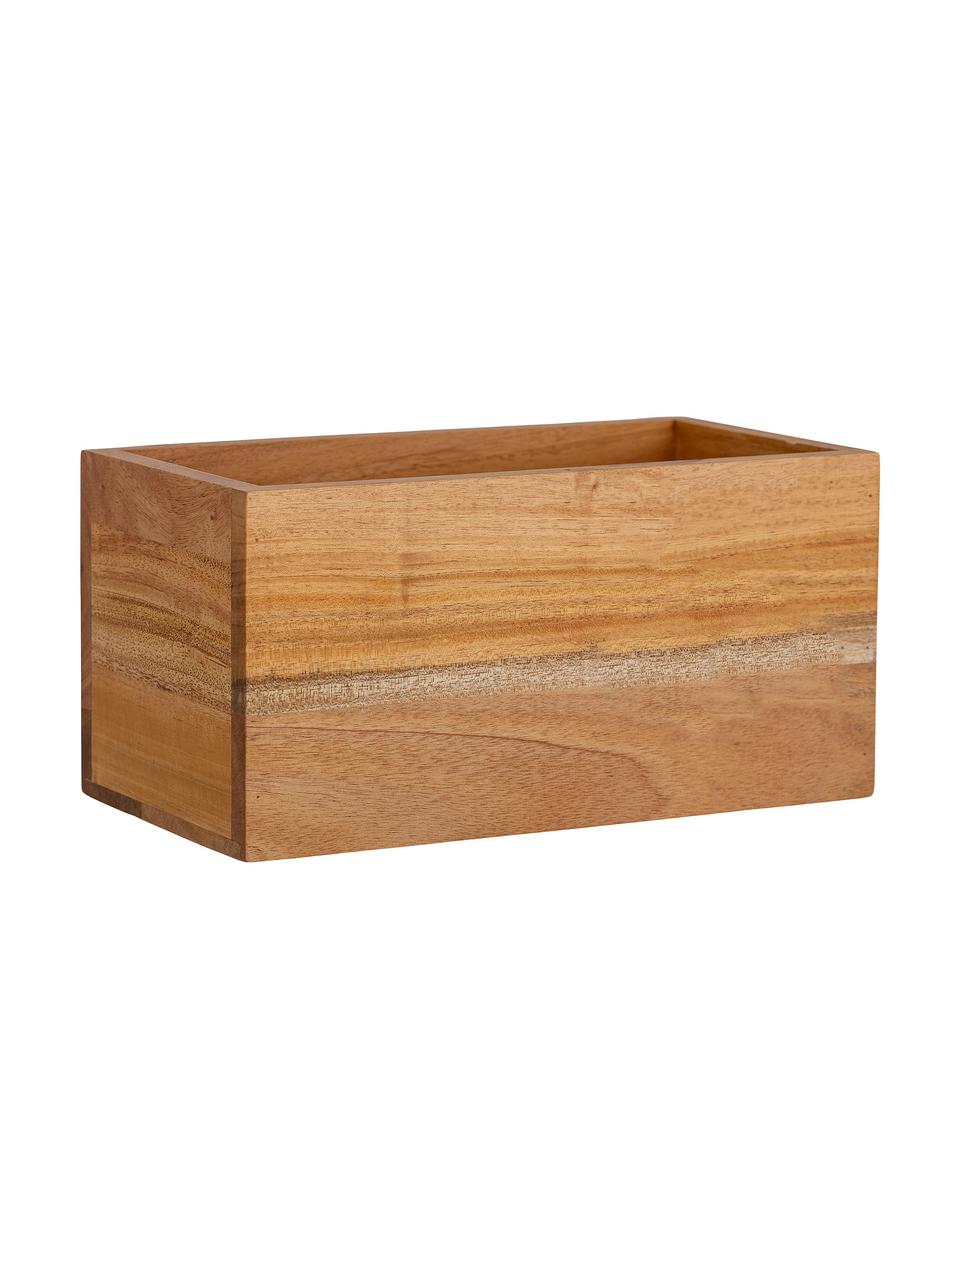 Opbergdoos Solin uit mahoniehout, Mahoniehout, Licht hout, B 24 x H 12 cm